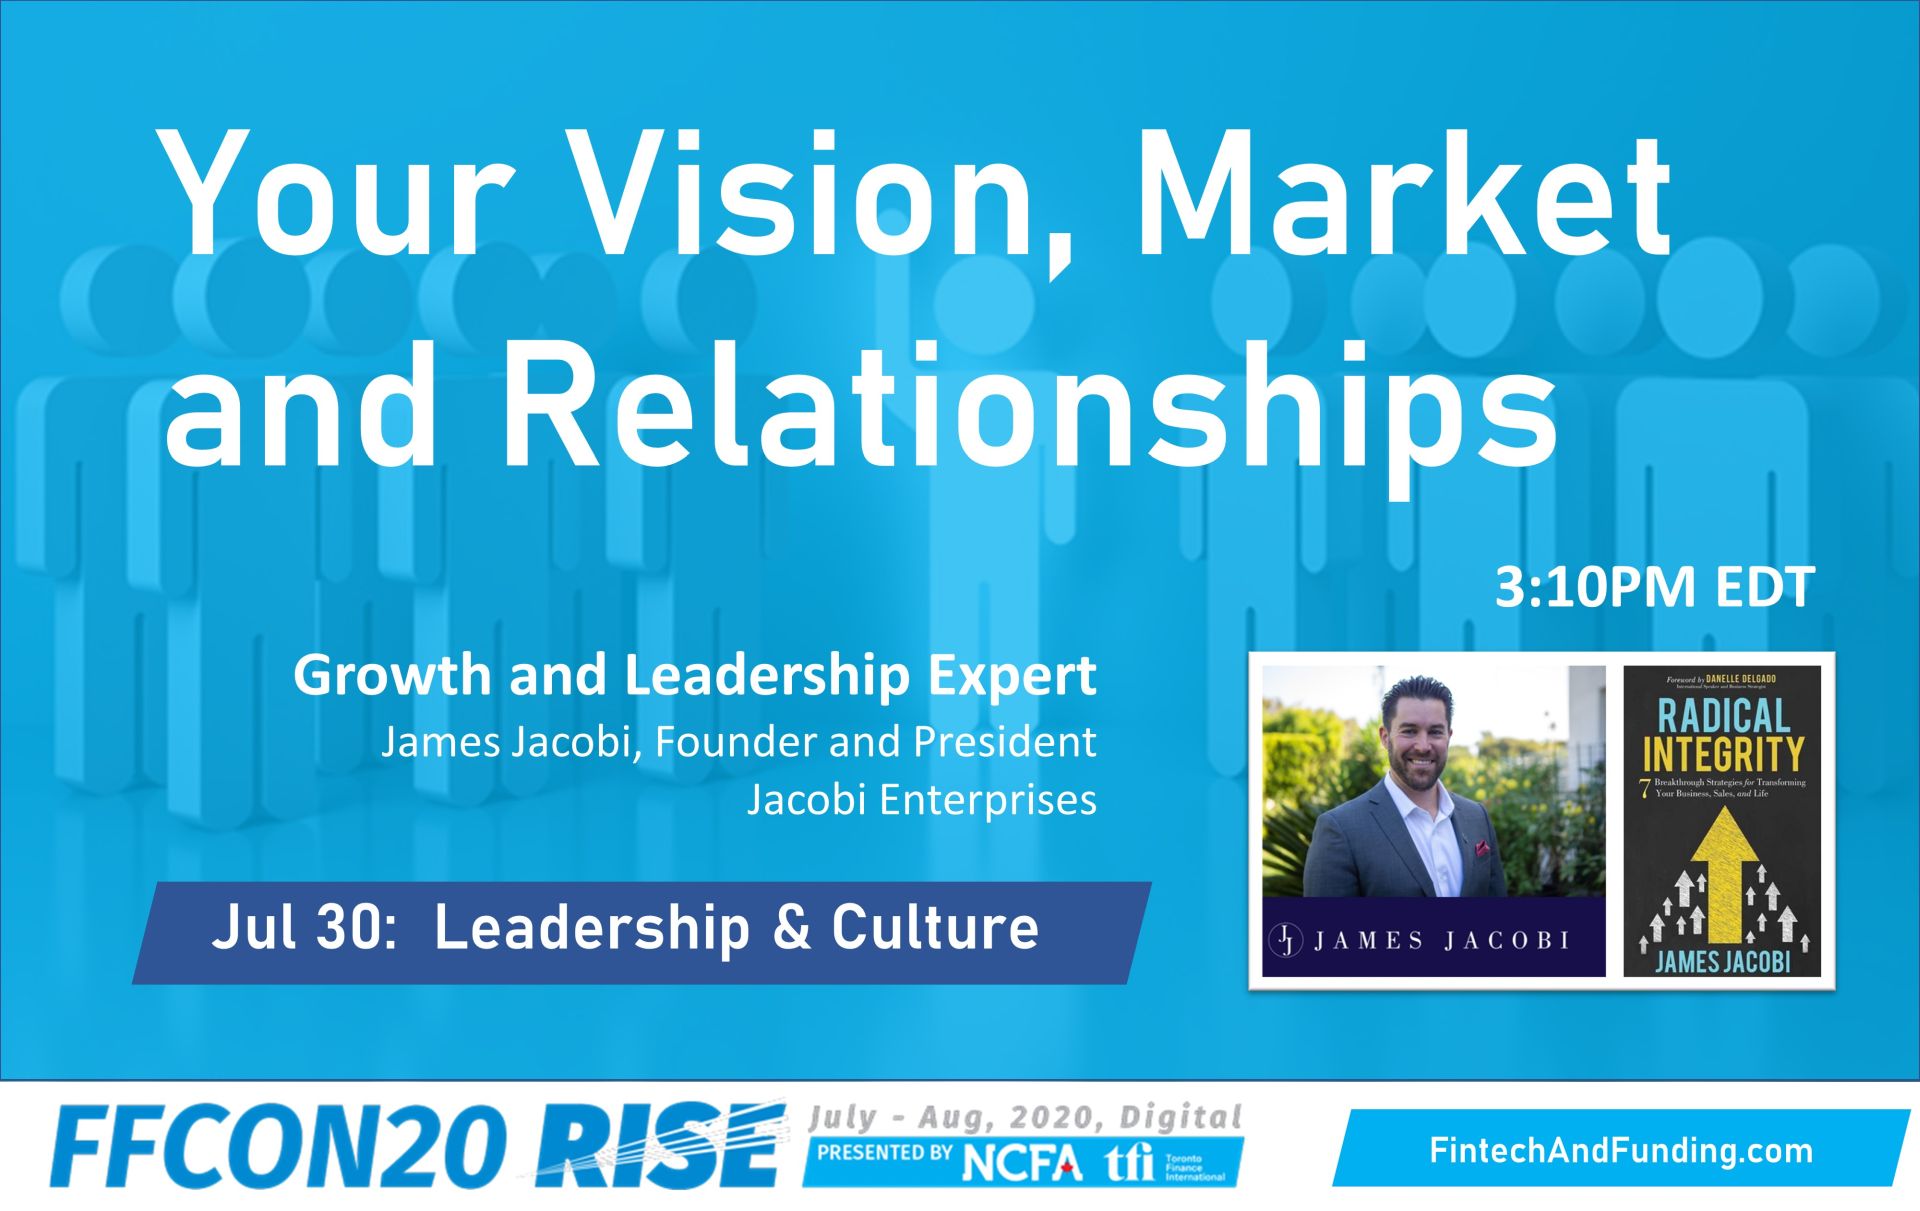 FFCON20 July 30 Your Vision, Market and Relationships - James Jacobi